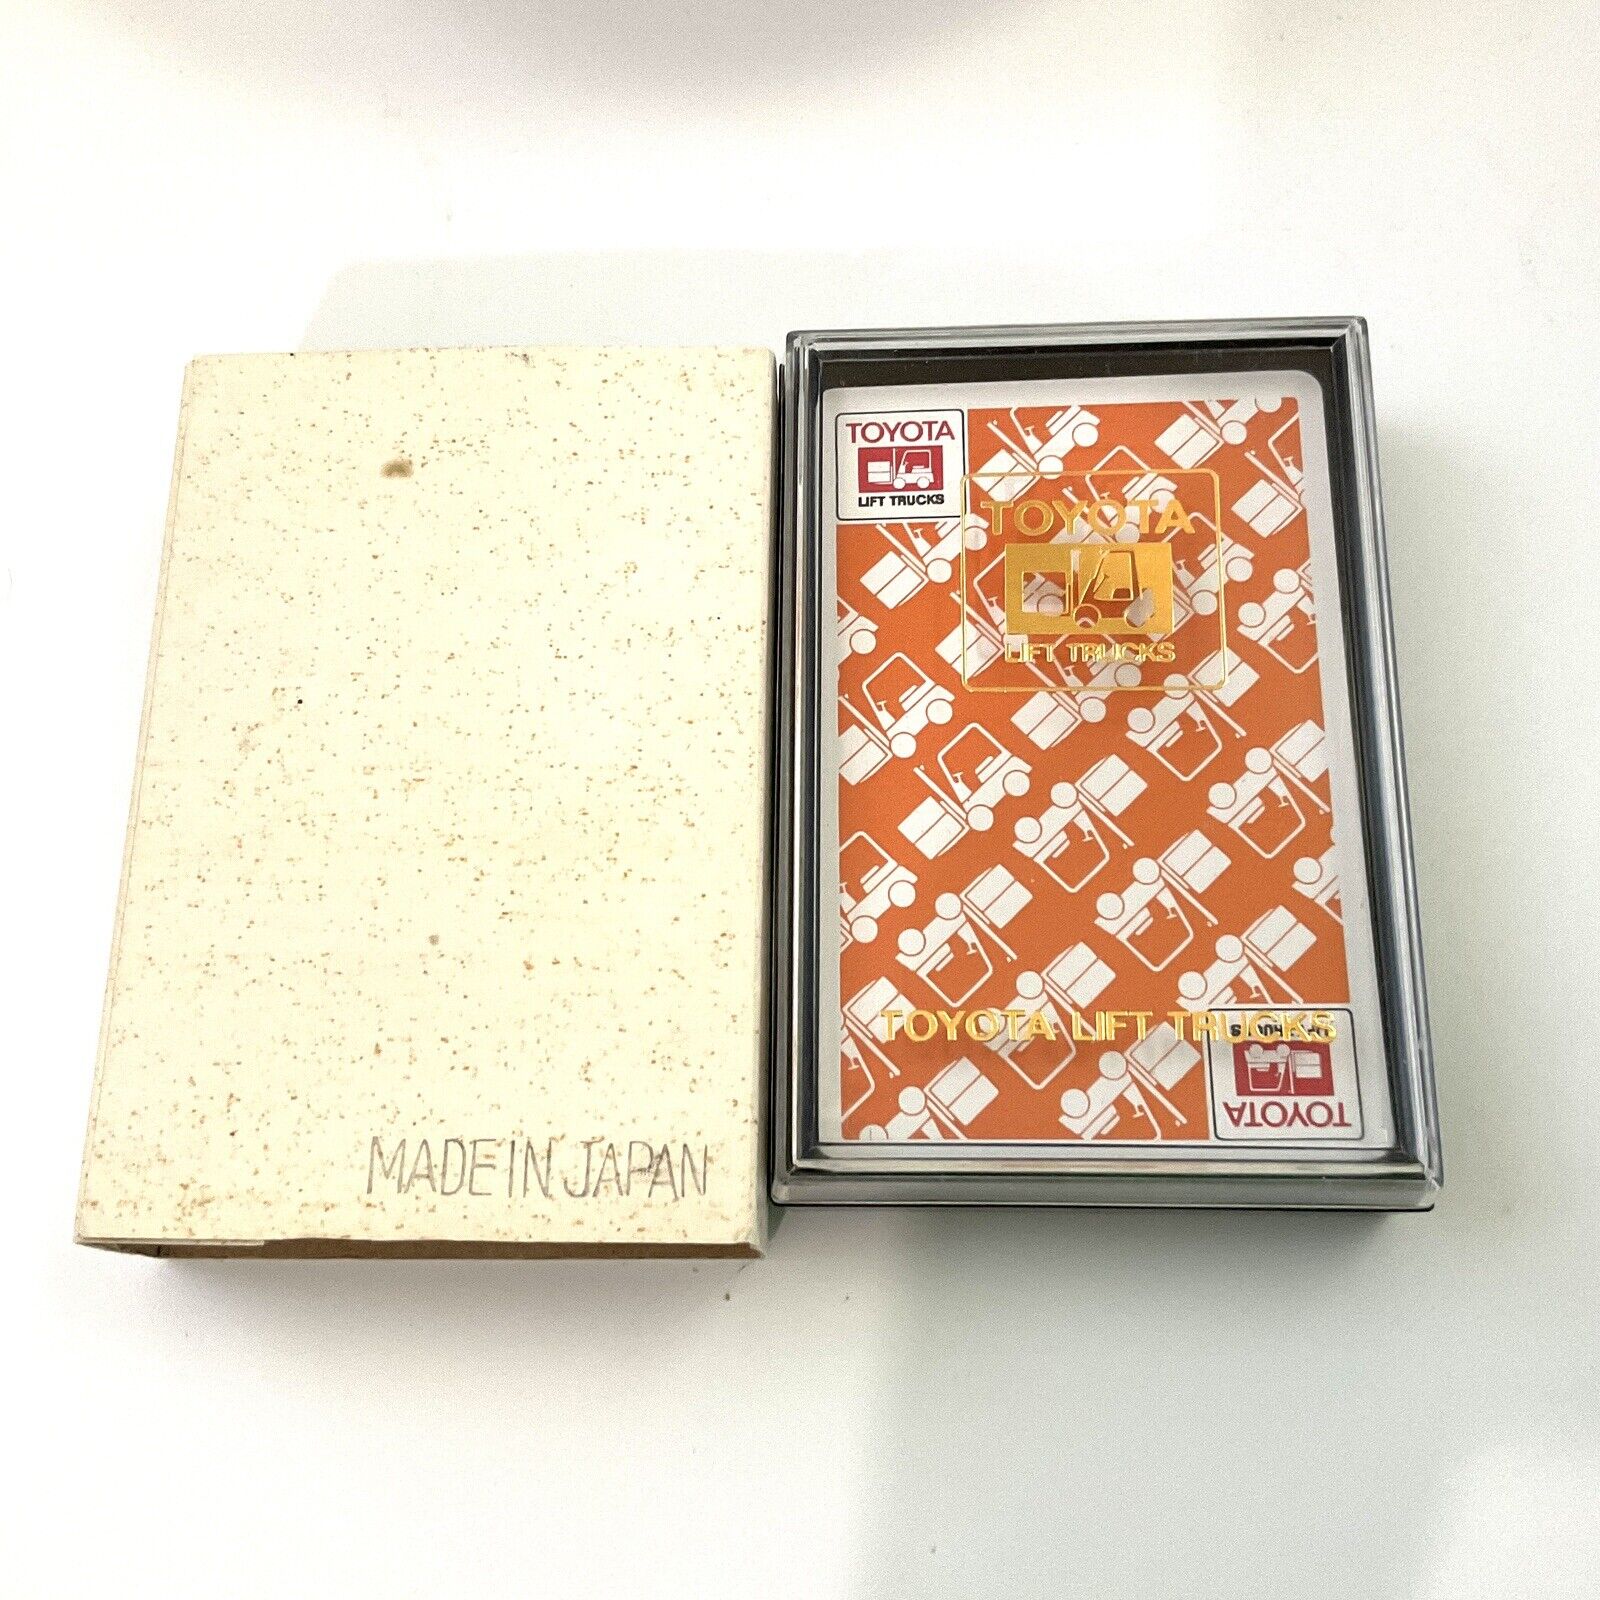 Vintage Nintendo Toyota Lift Truck Playing Cards In Case Made in Japan